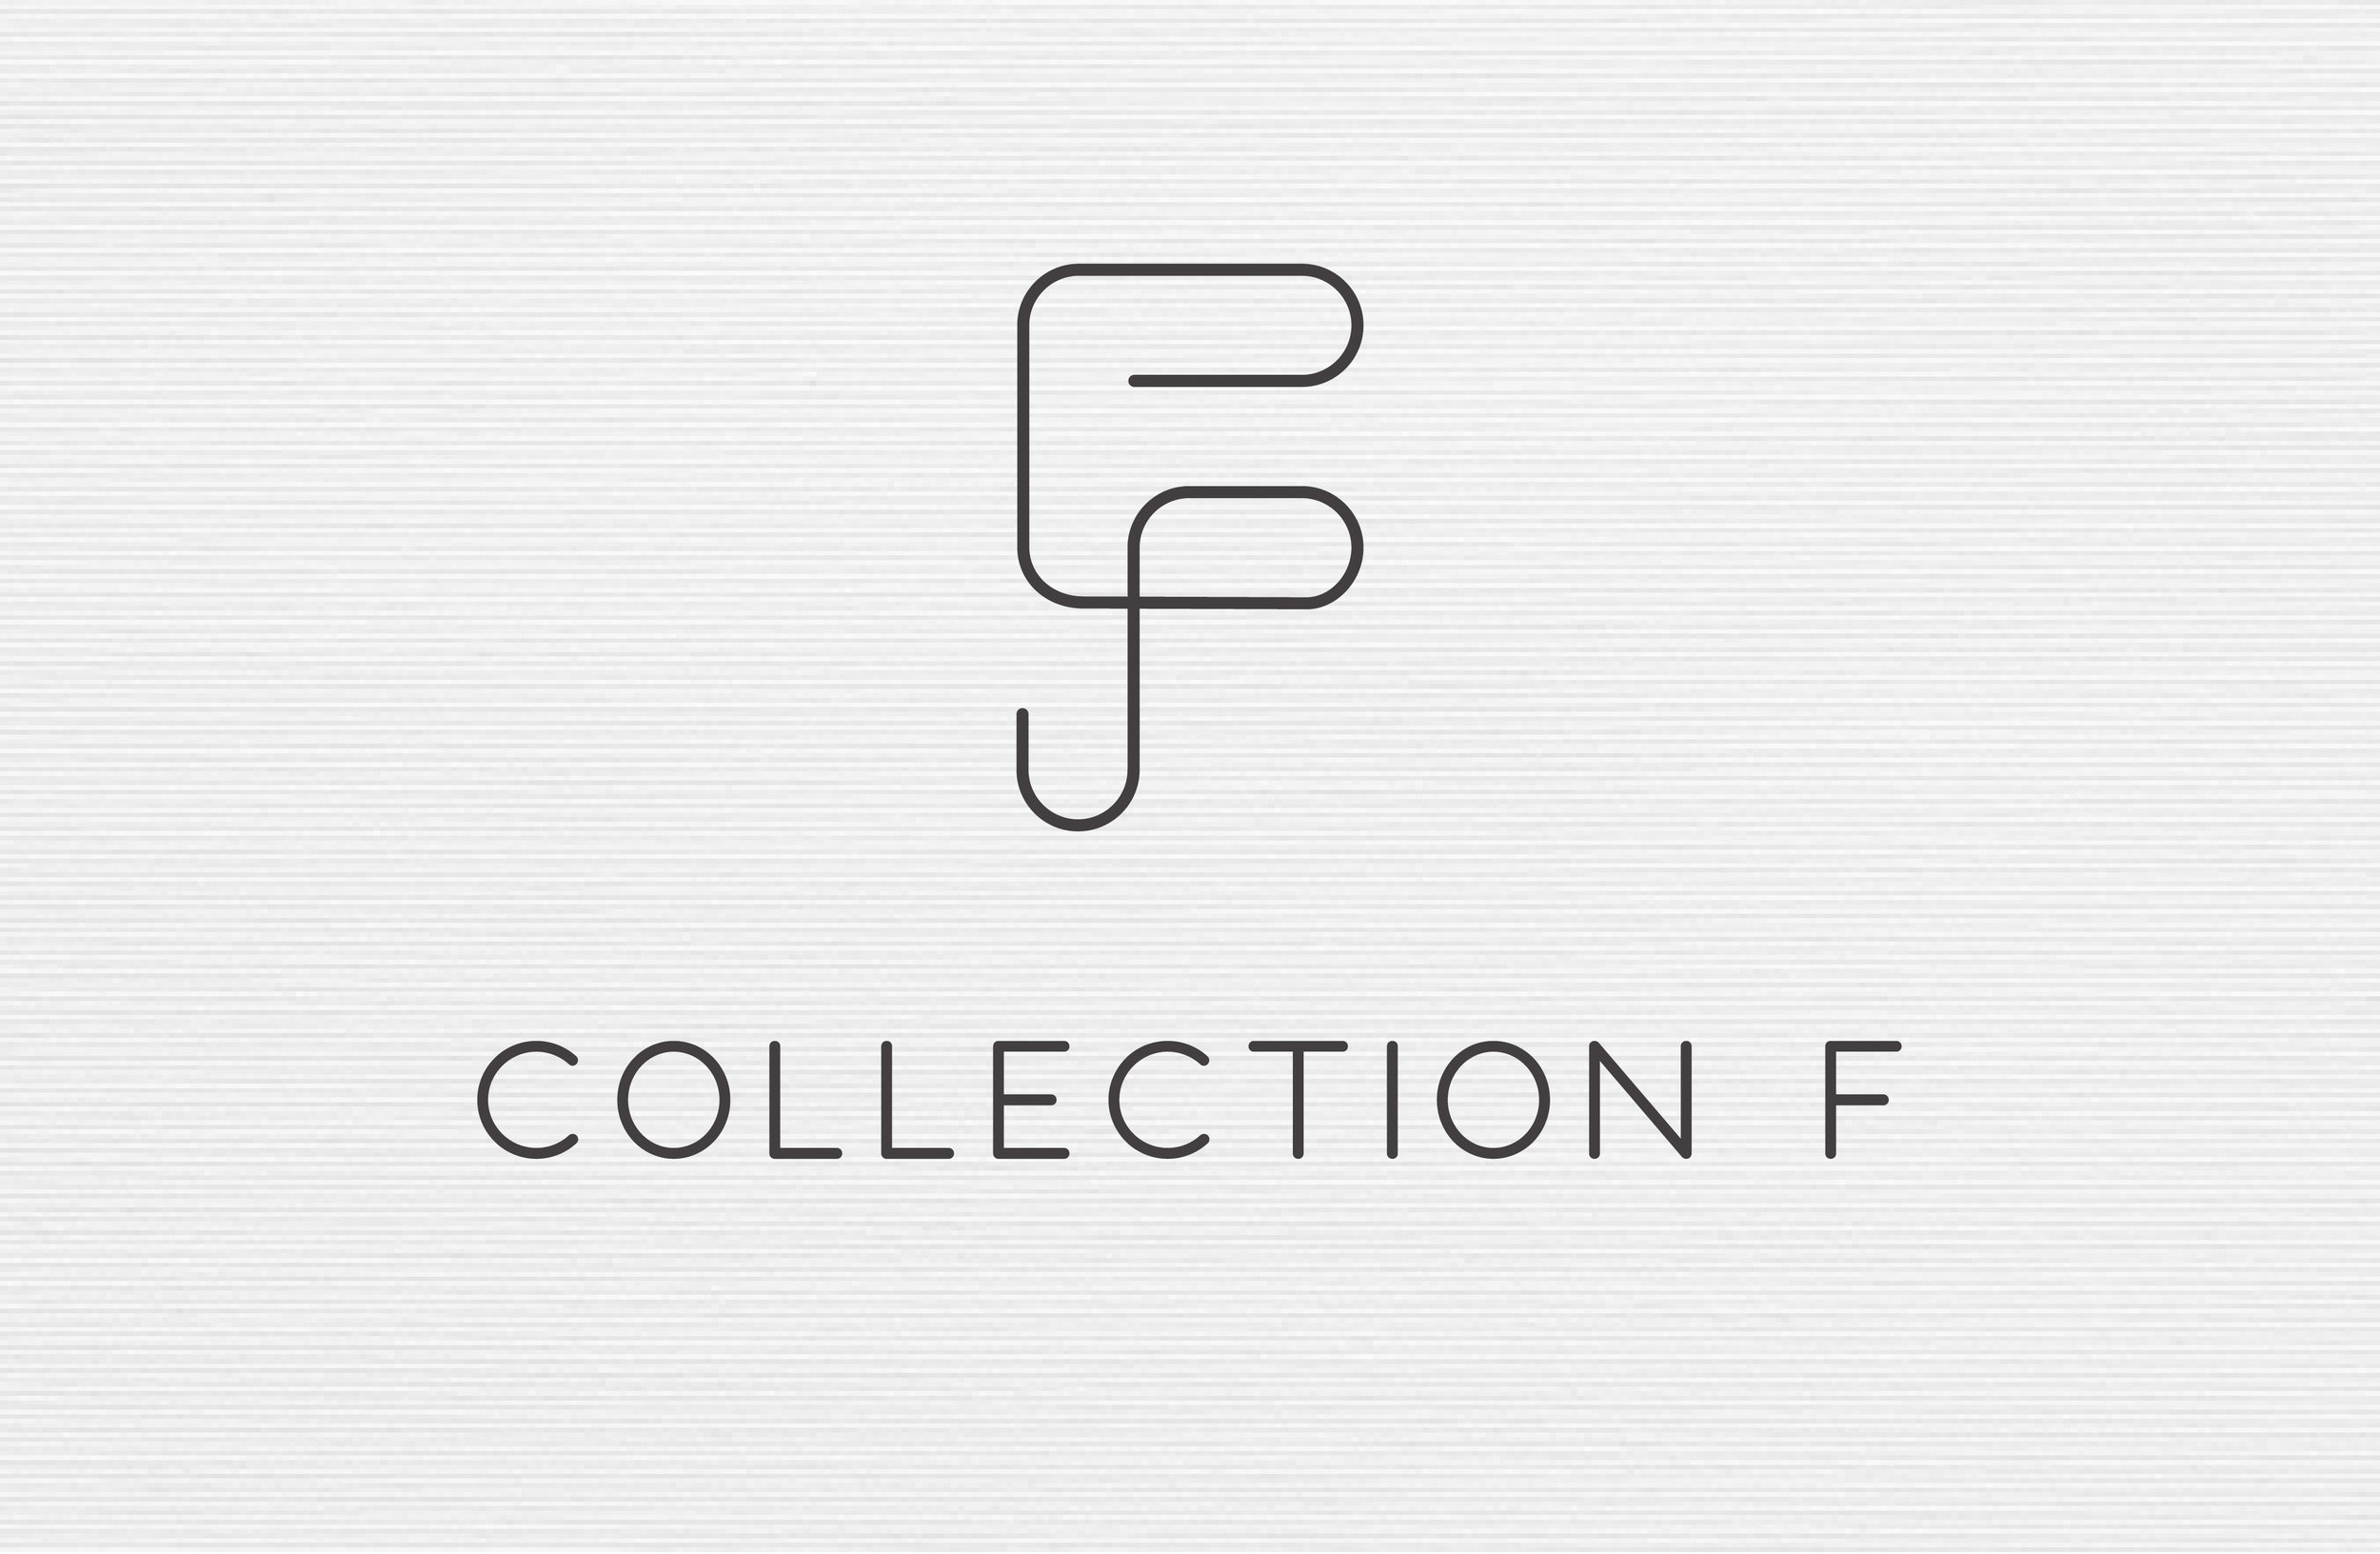 collection-F-01.jpg